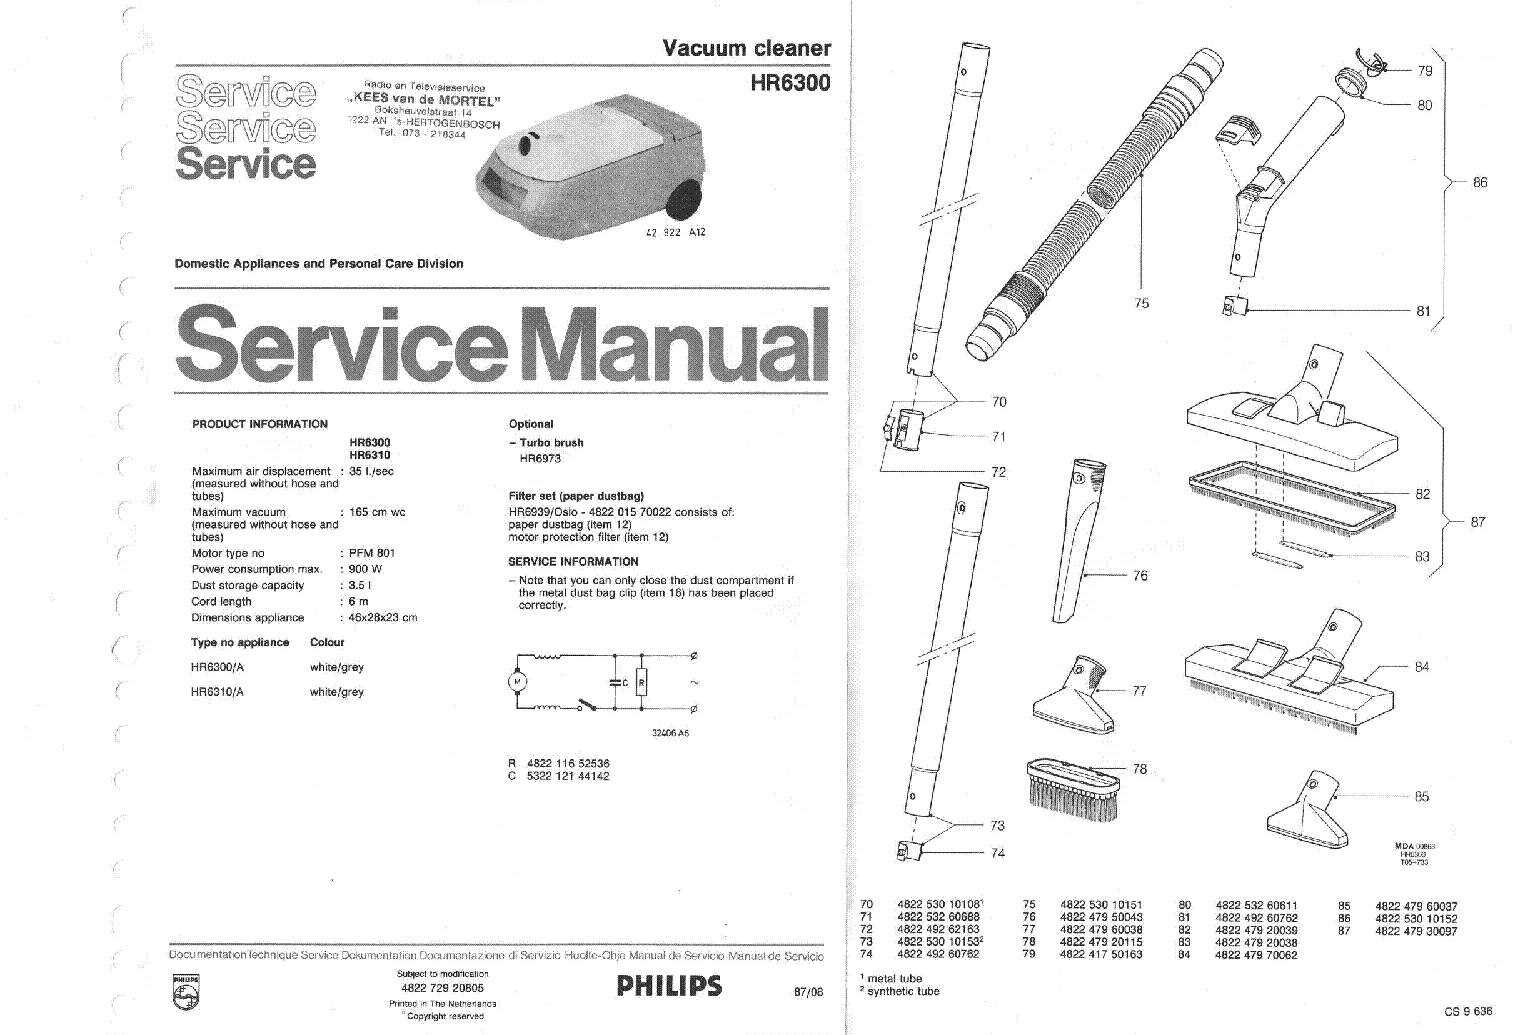 PHILIPS HR6300 SM service manual (1st page)